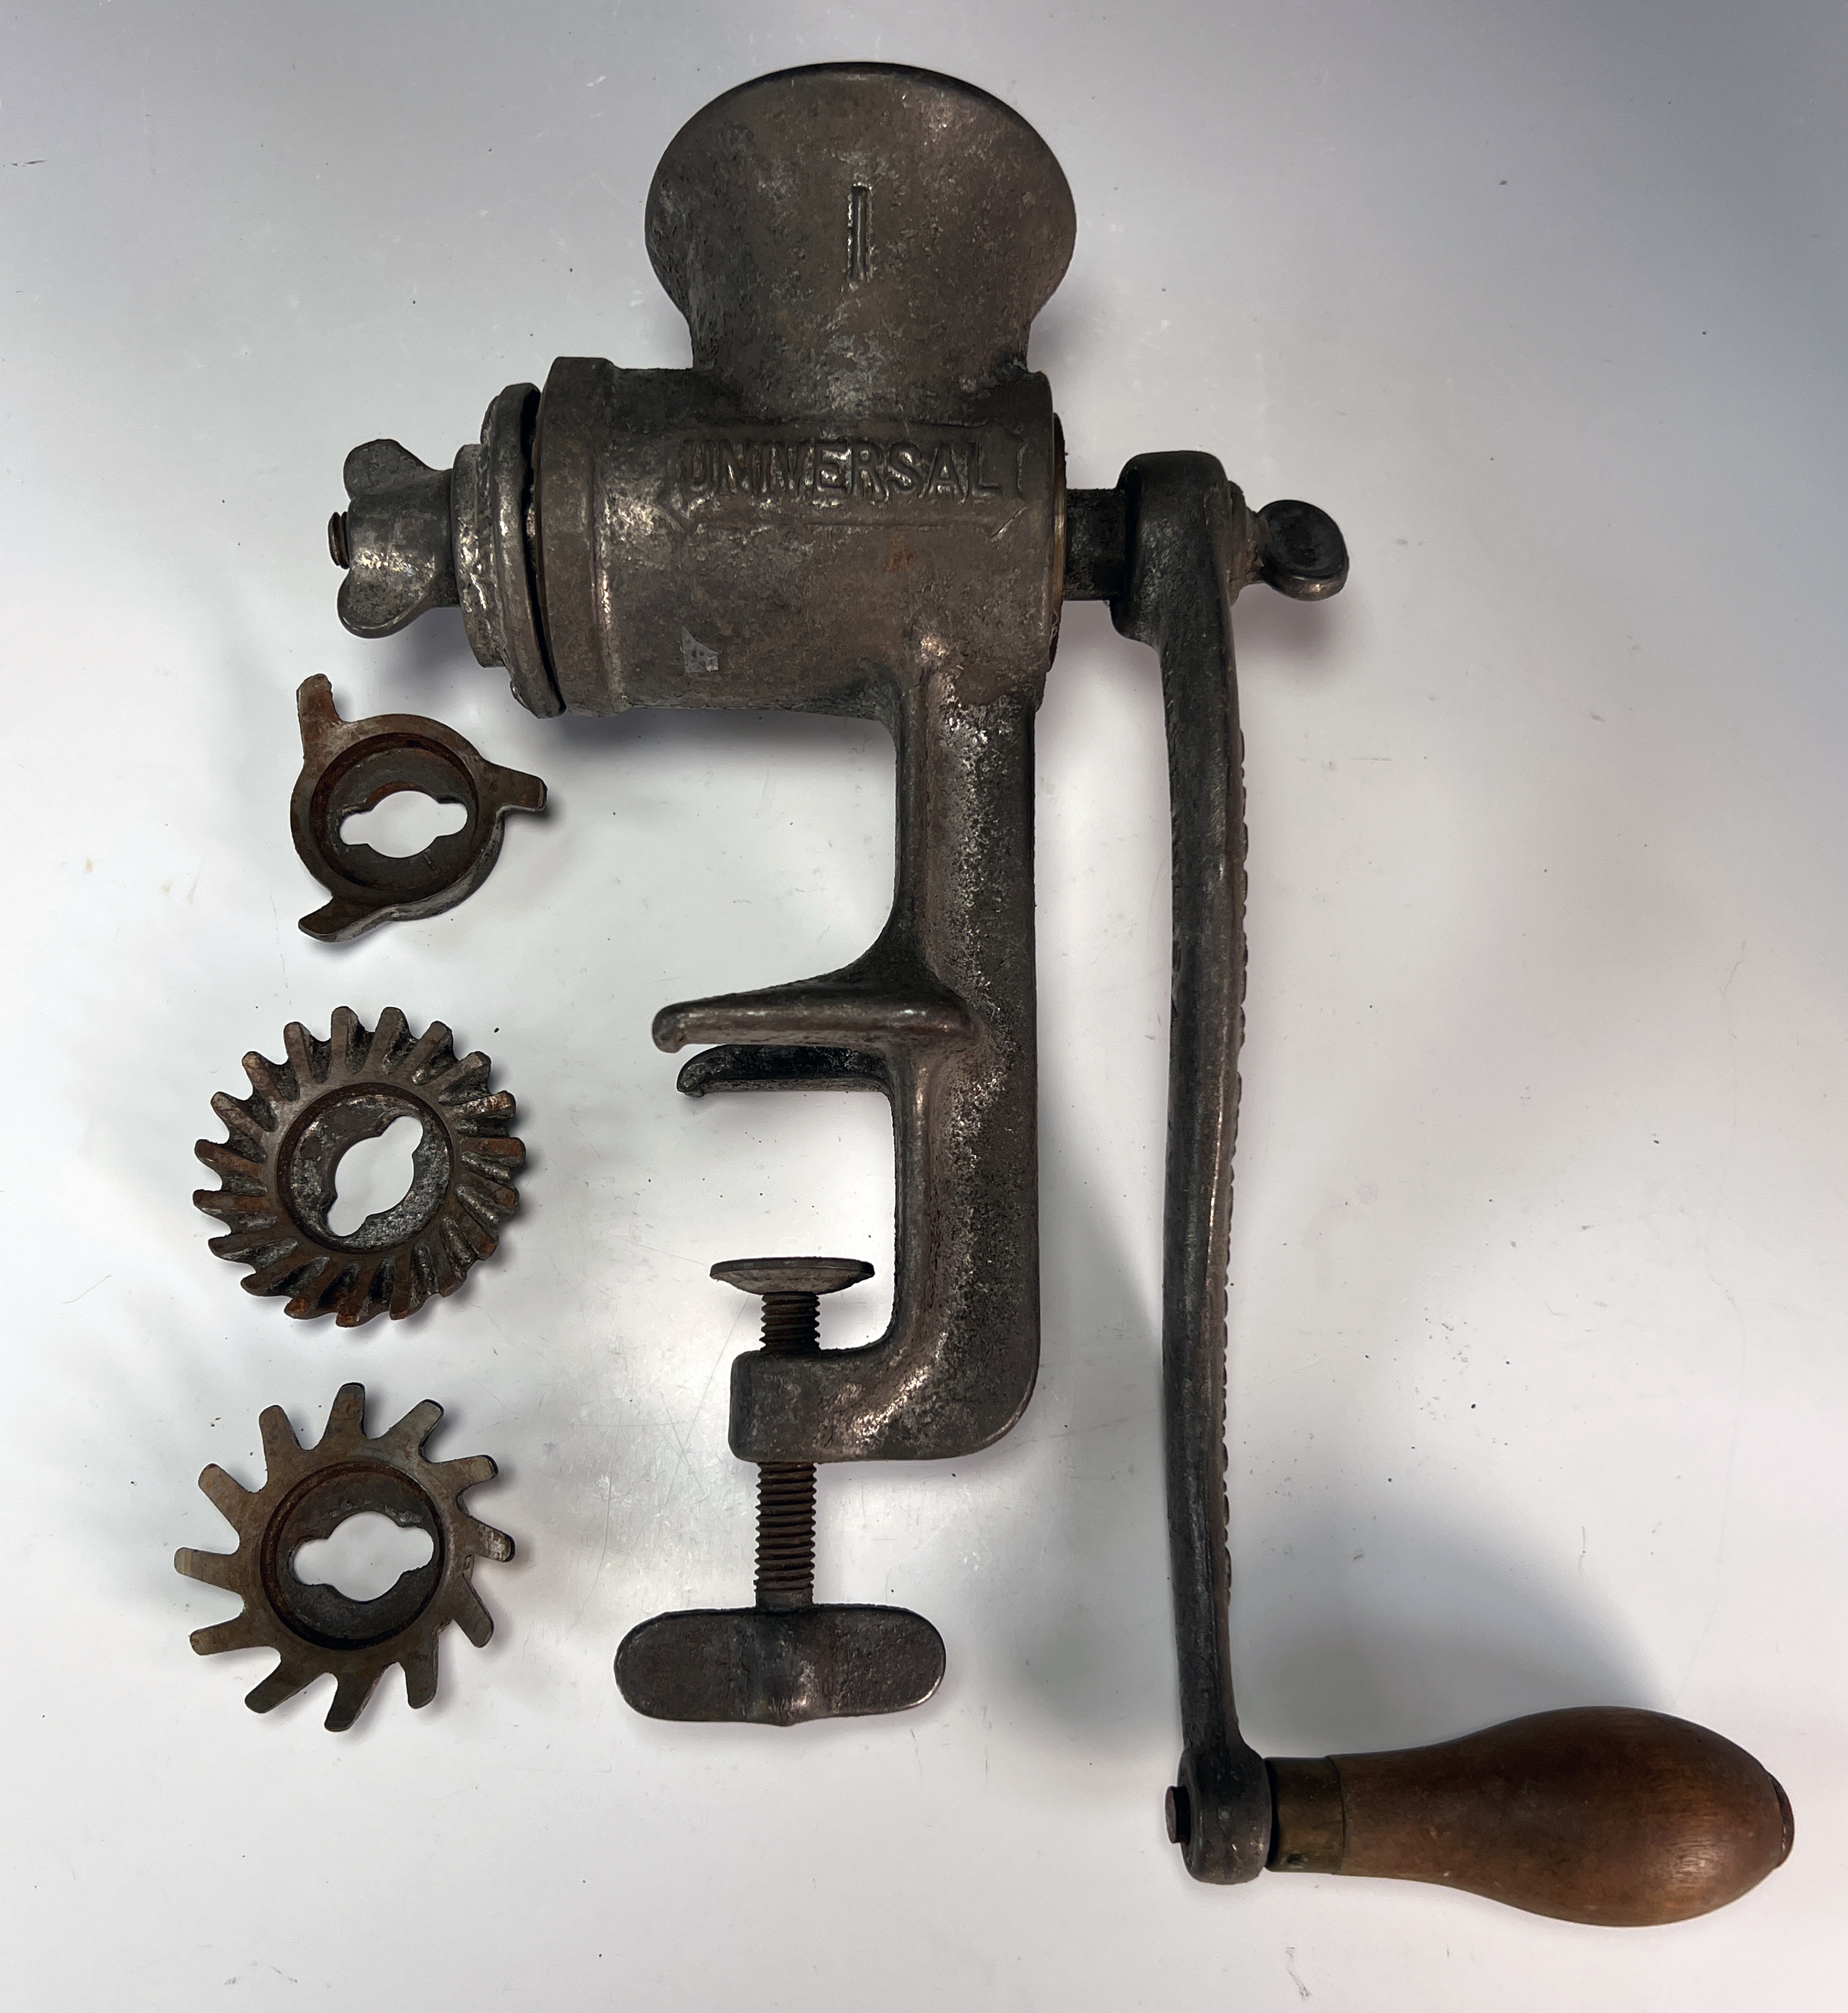 Vintage Universal No. 1 Food Meat Grinder Hand Crank Table Mount Made In USA